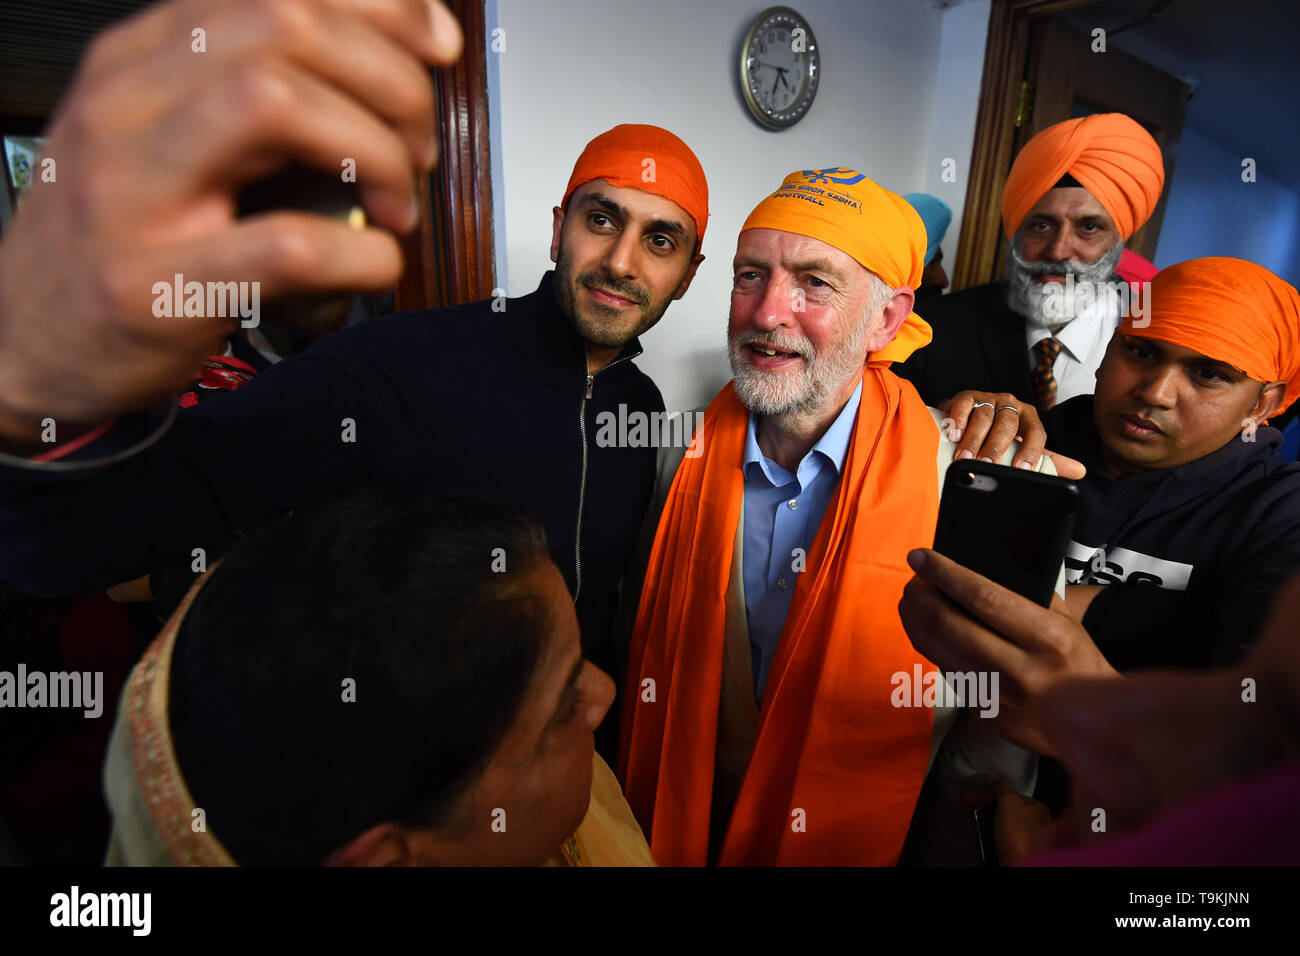 Labour leader Jeremy Corbyn poses for a picture during a visit to Gurdwara Sri Guru Singh Sabha in Southall. Stock Photo